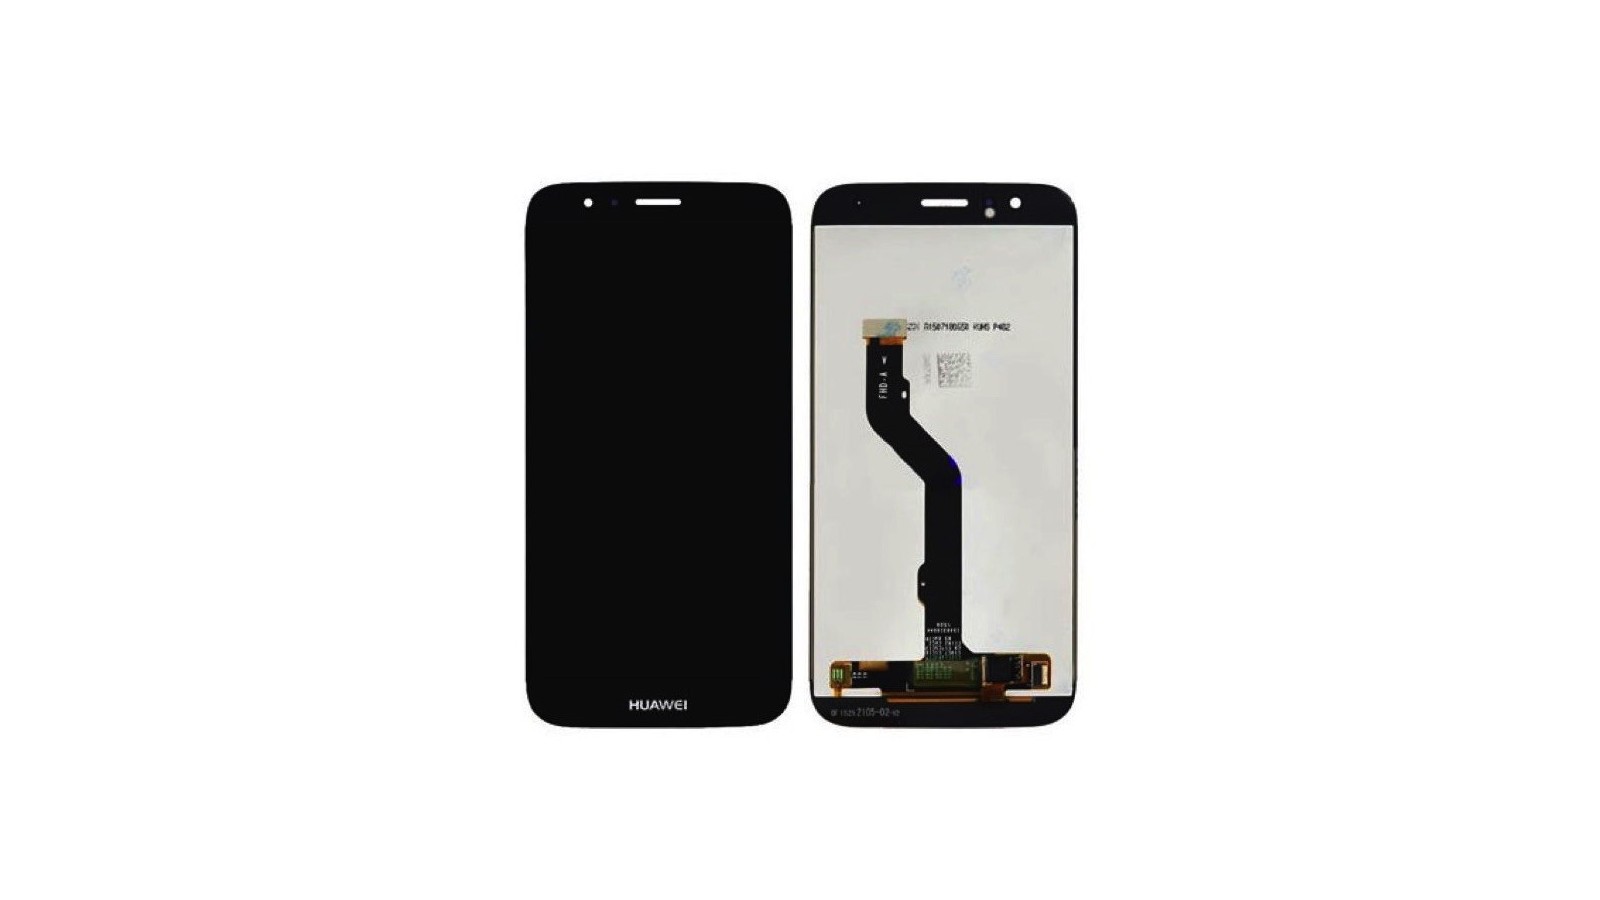 Display + Touch Screen per Huawei Ascend G8 nero